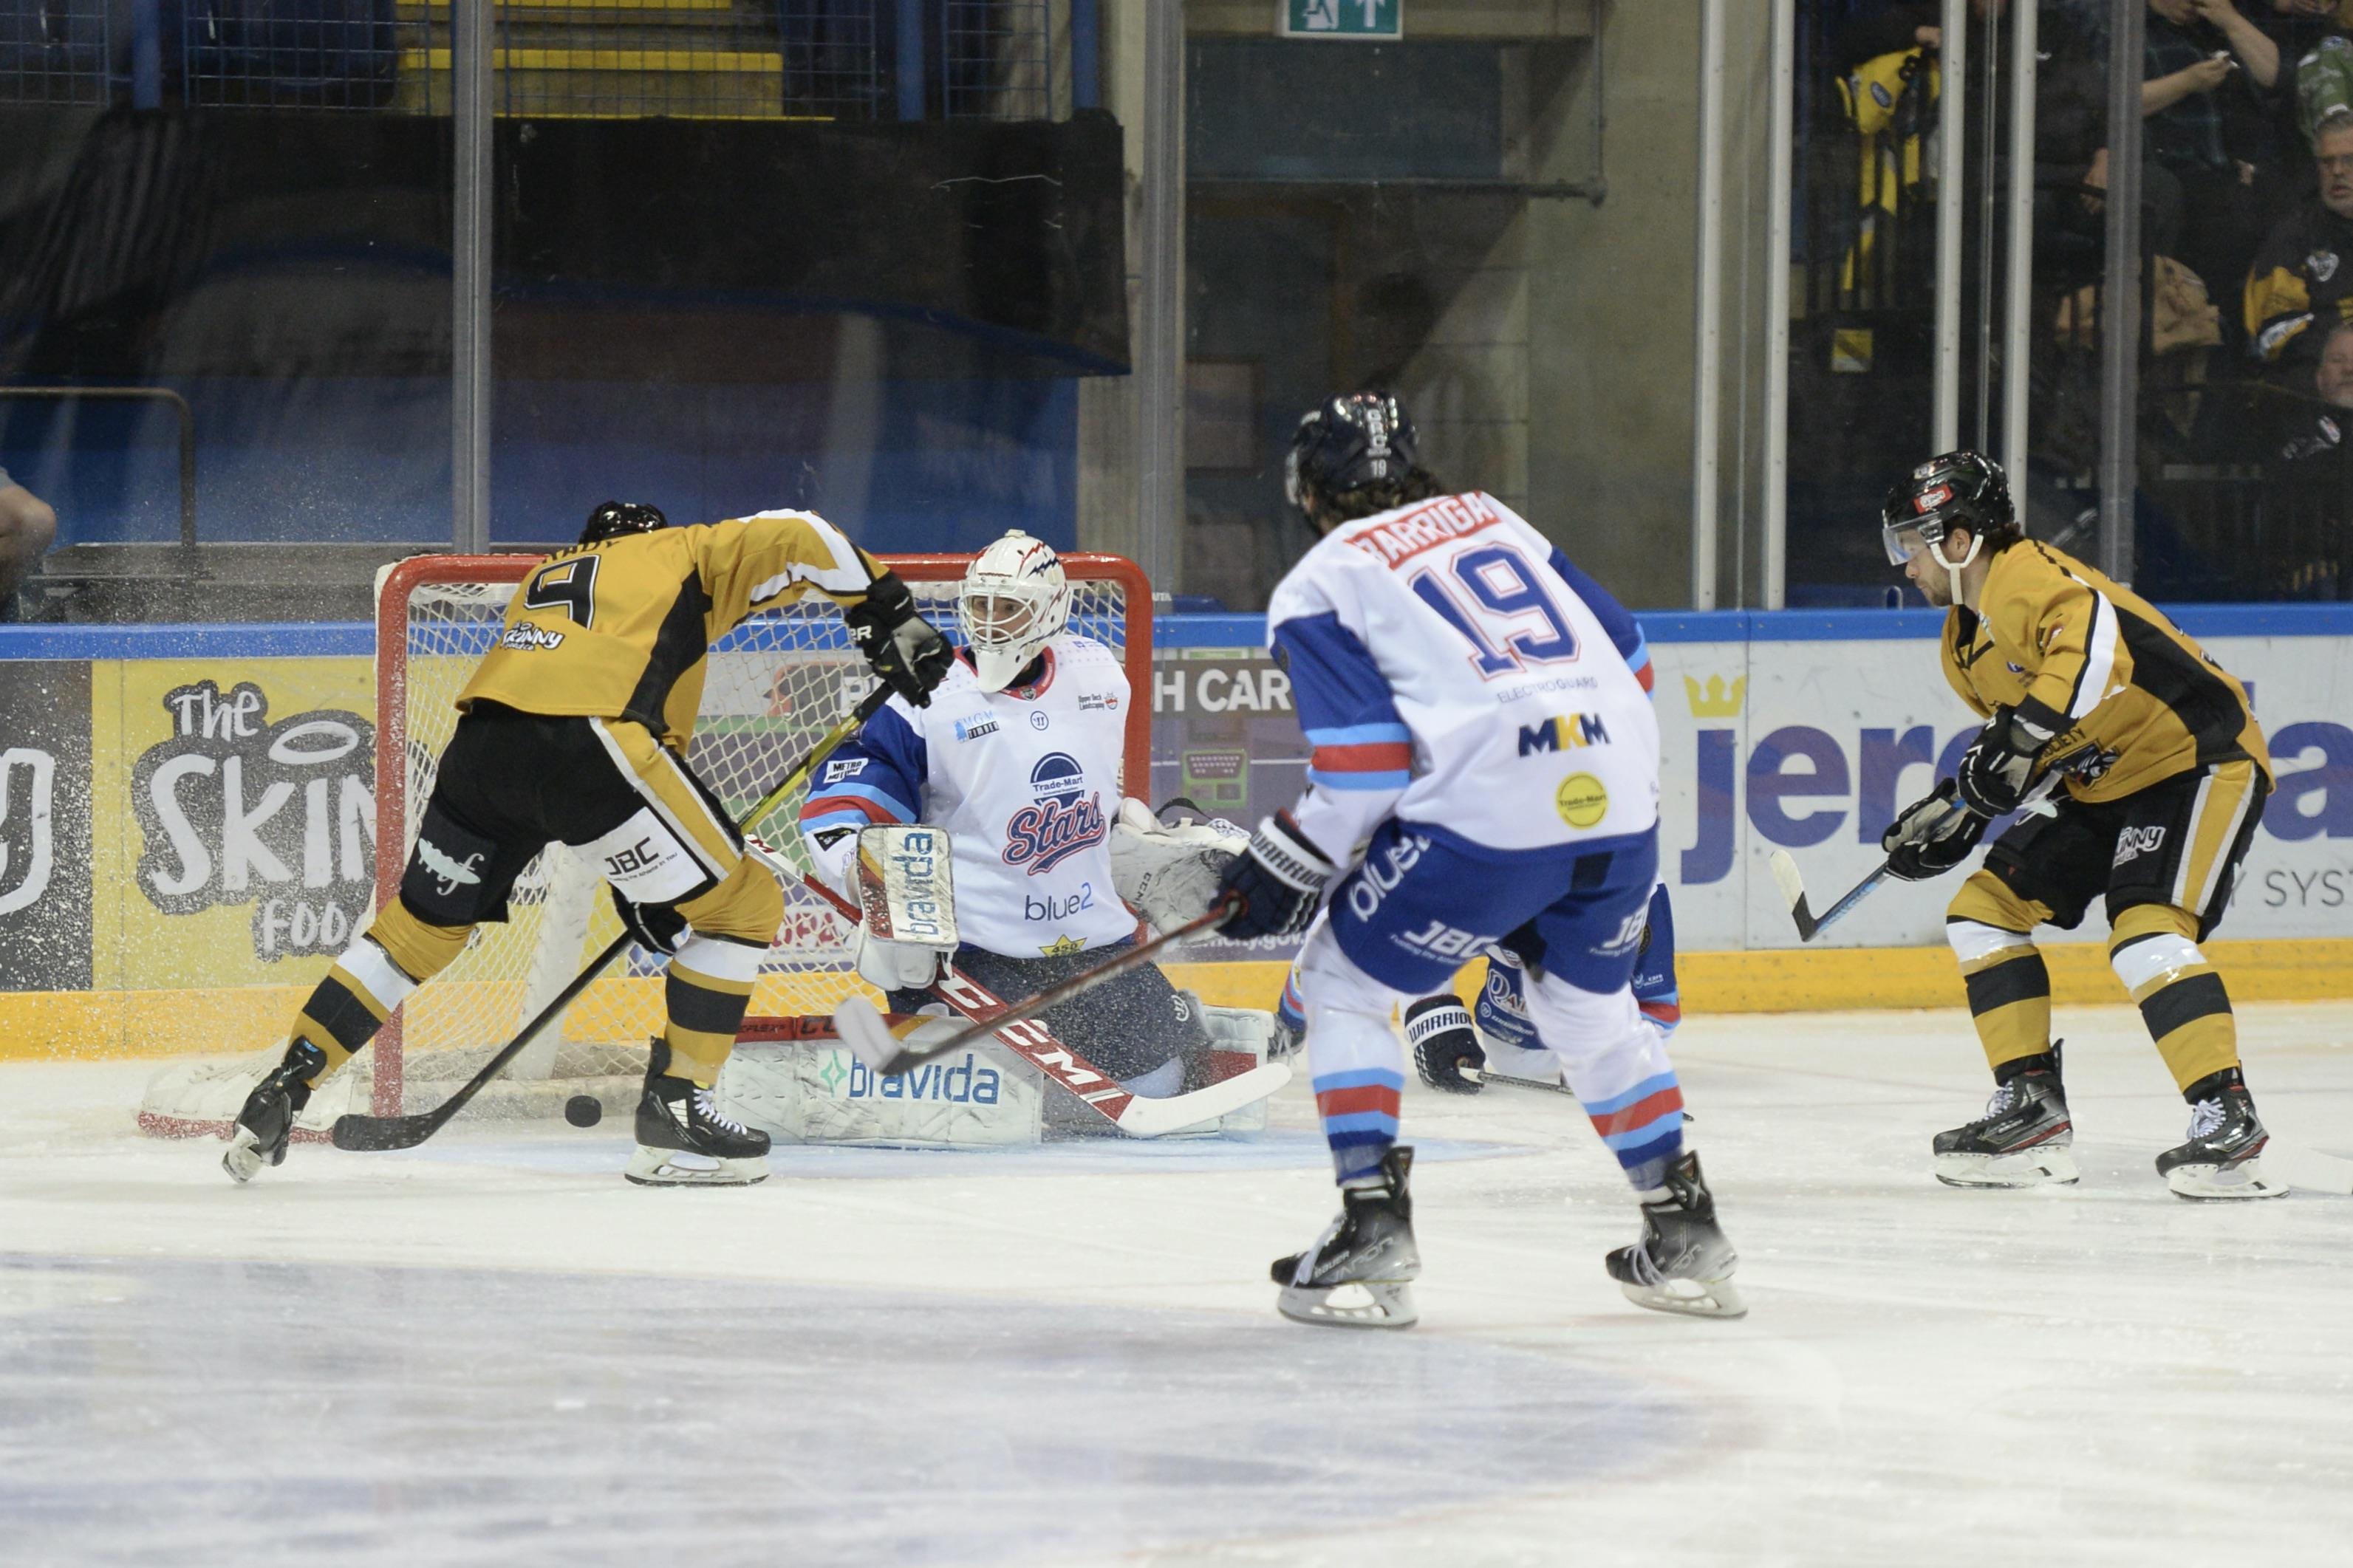 ELITE LEAGUE: PANTHERS 6-2 STARS Top Image